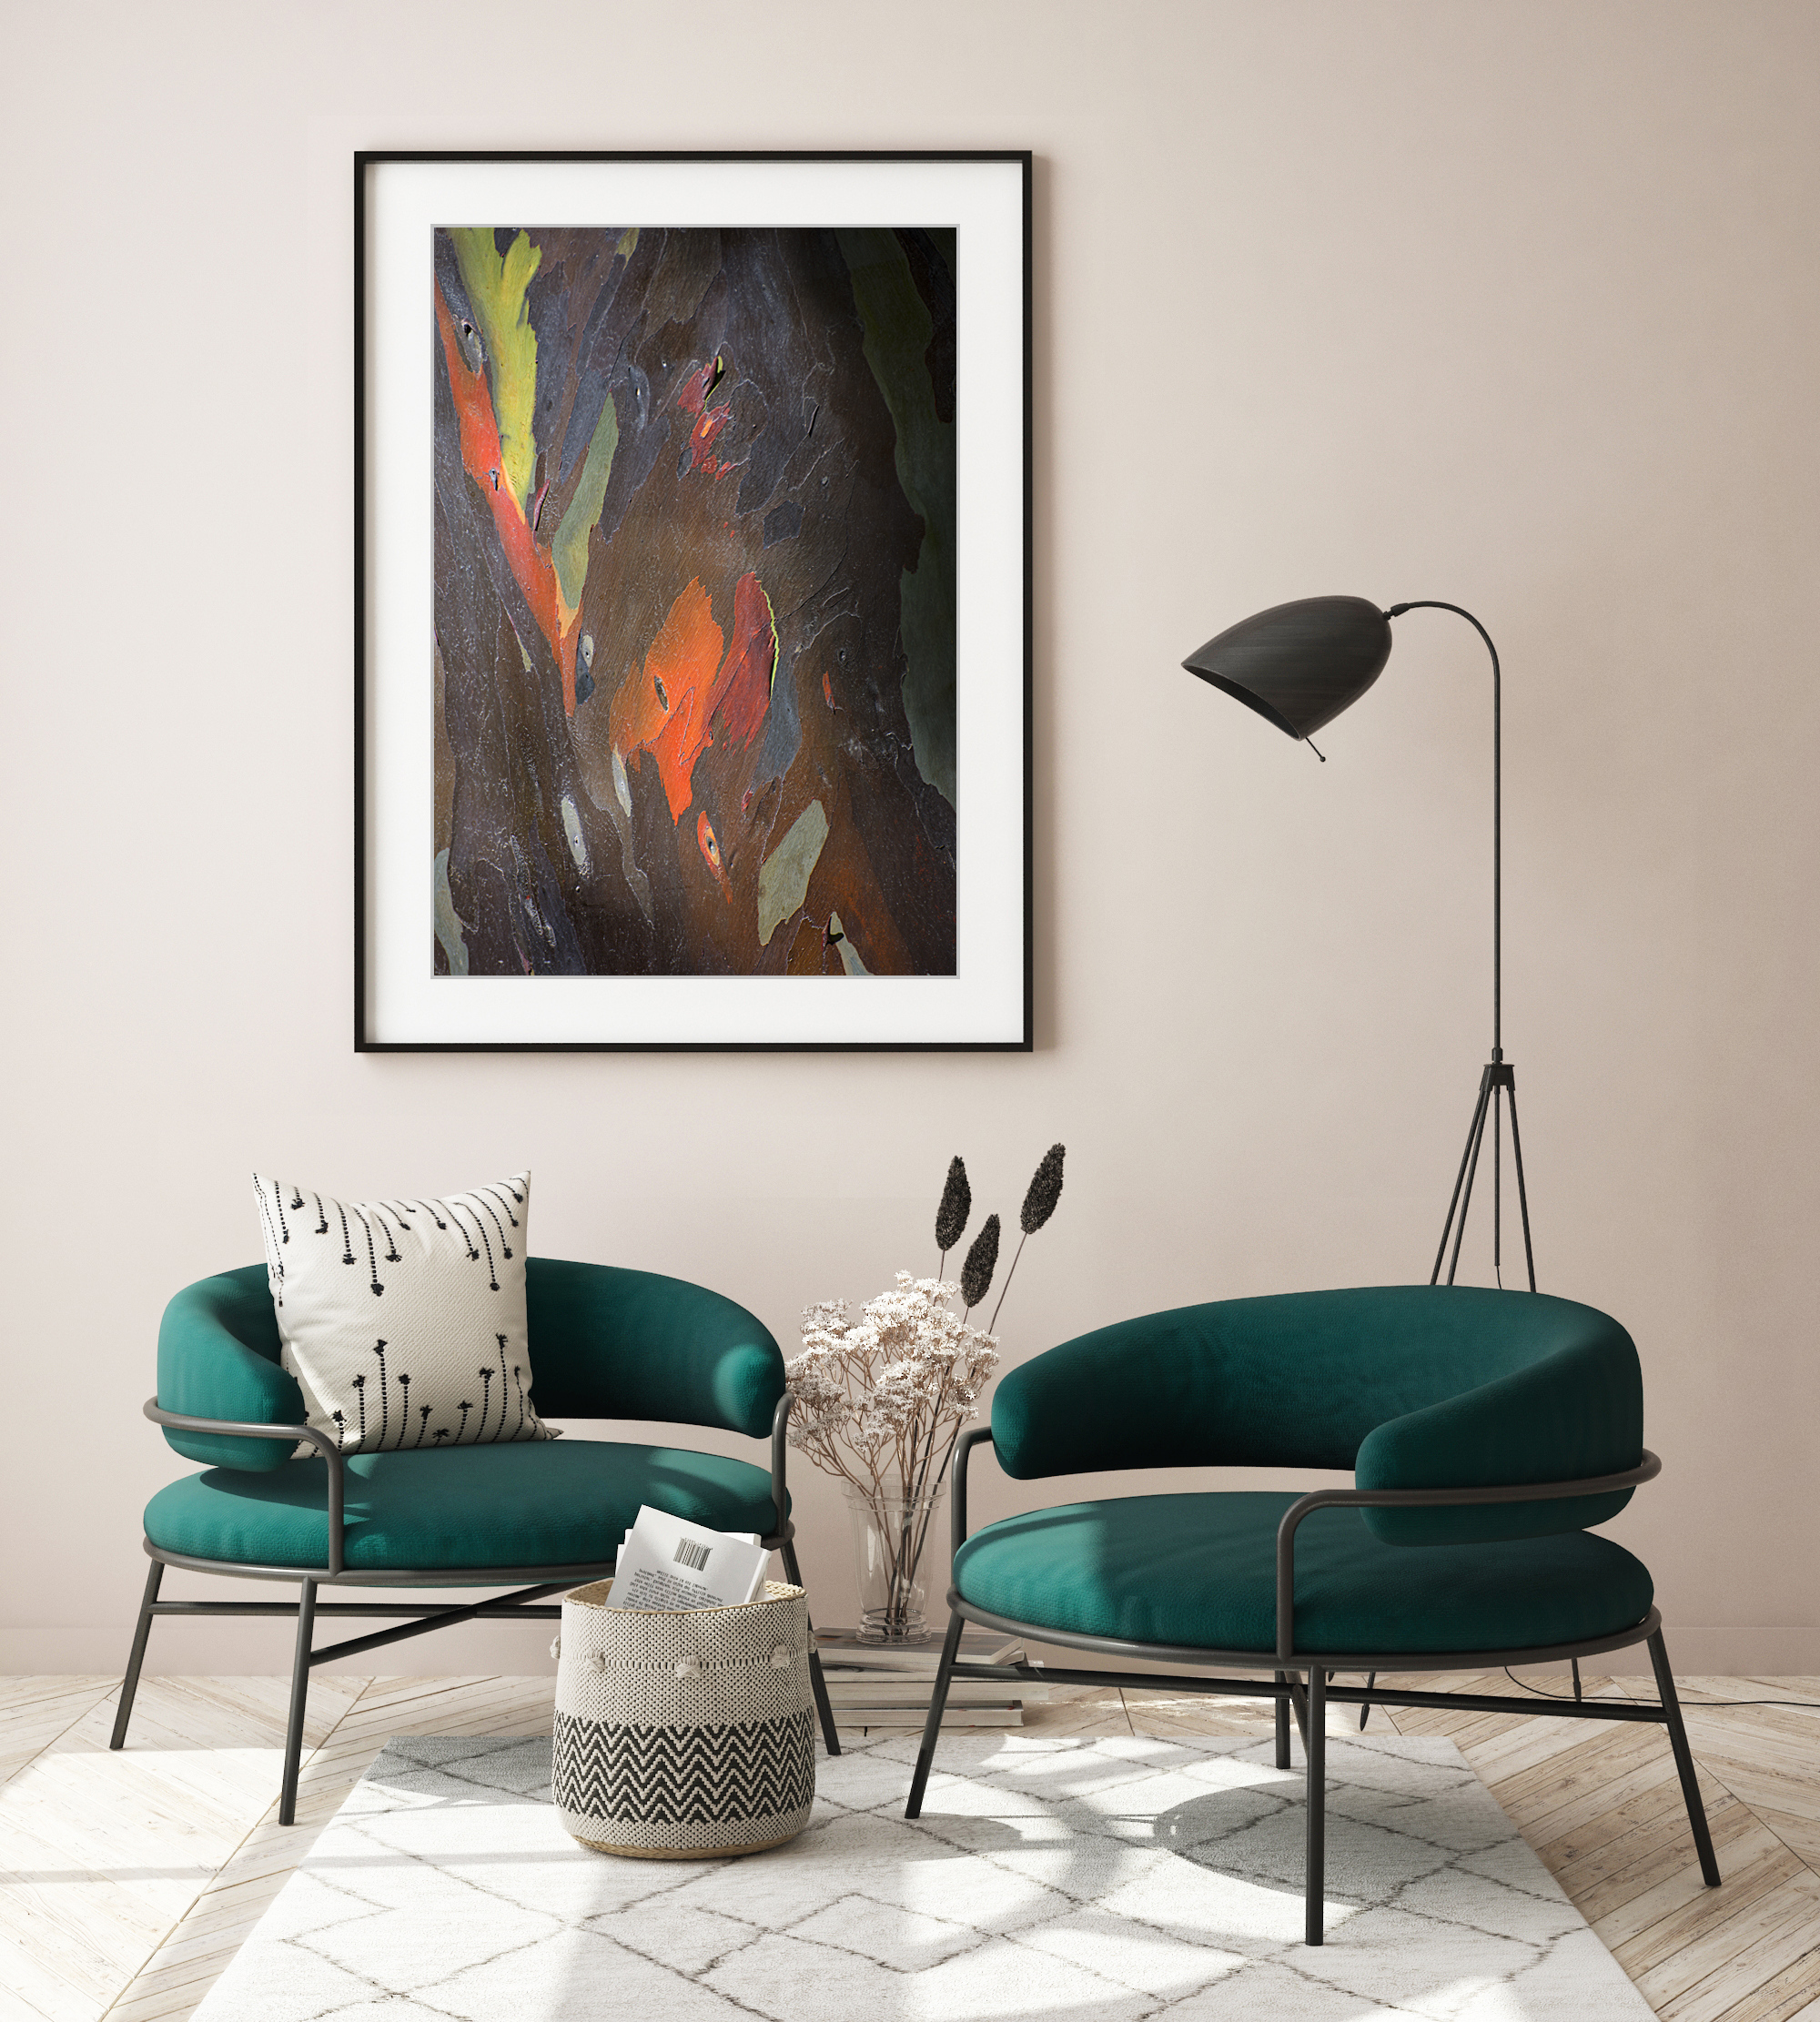 Rainbow eucalyptus print hanging in a living room with two chairs